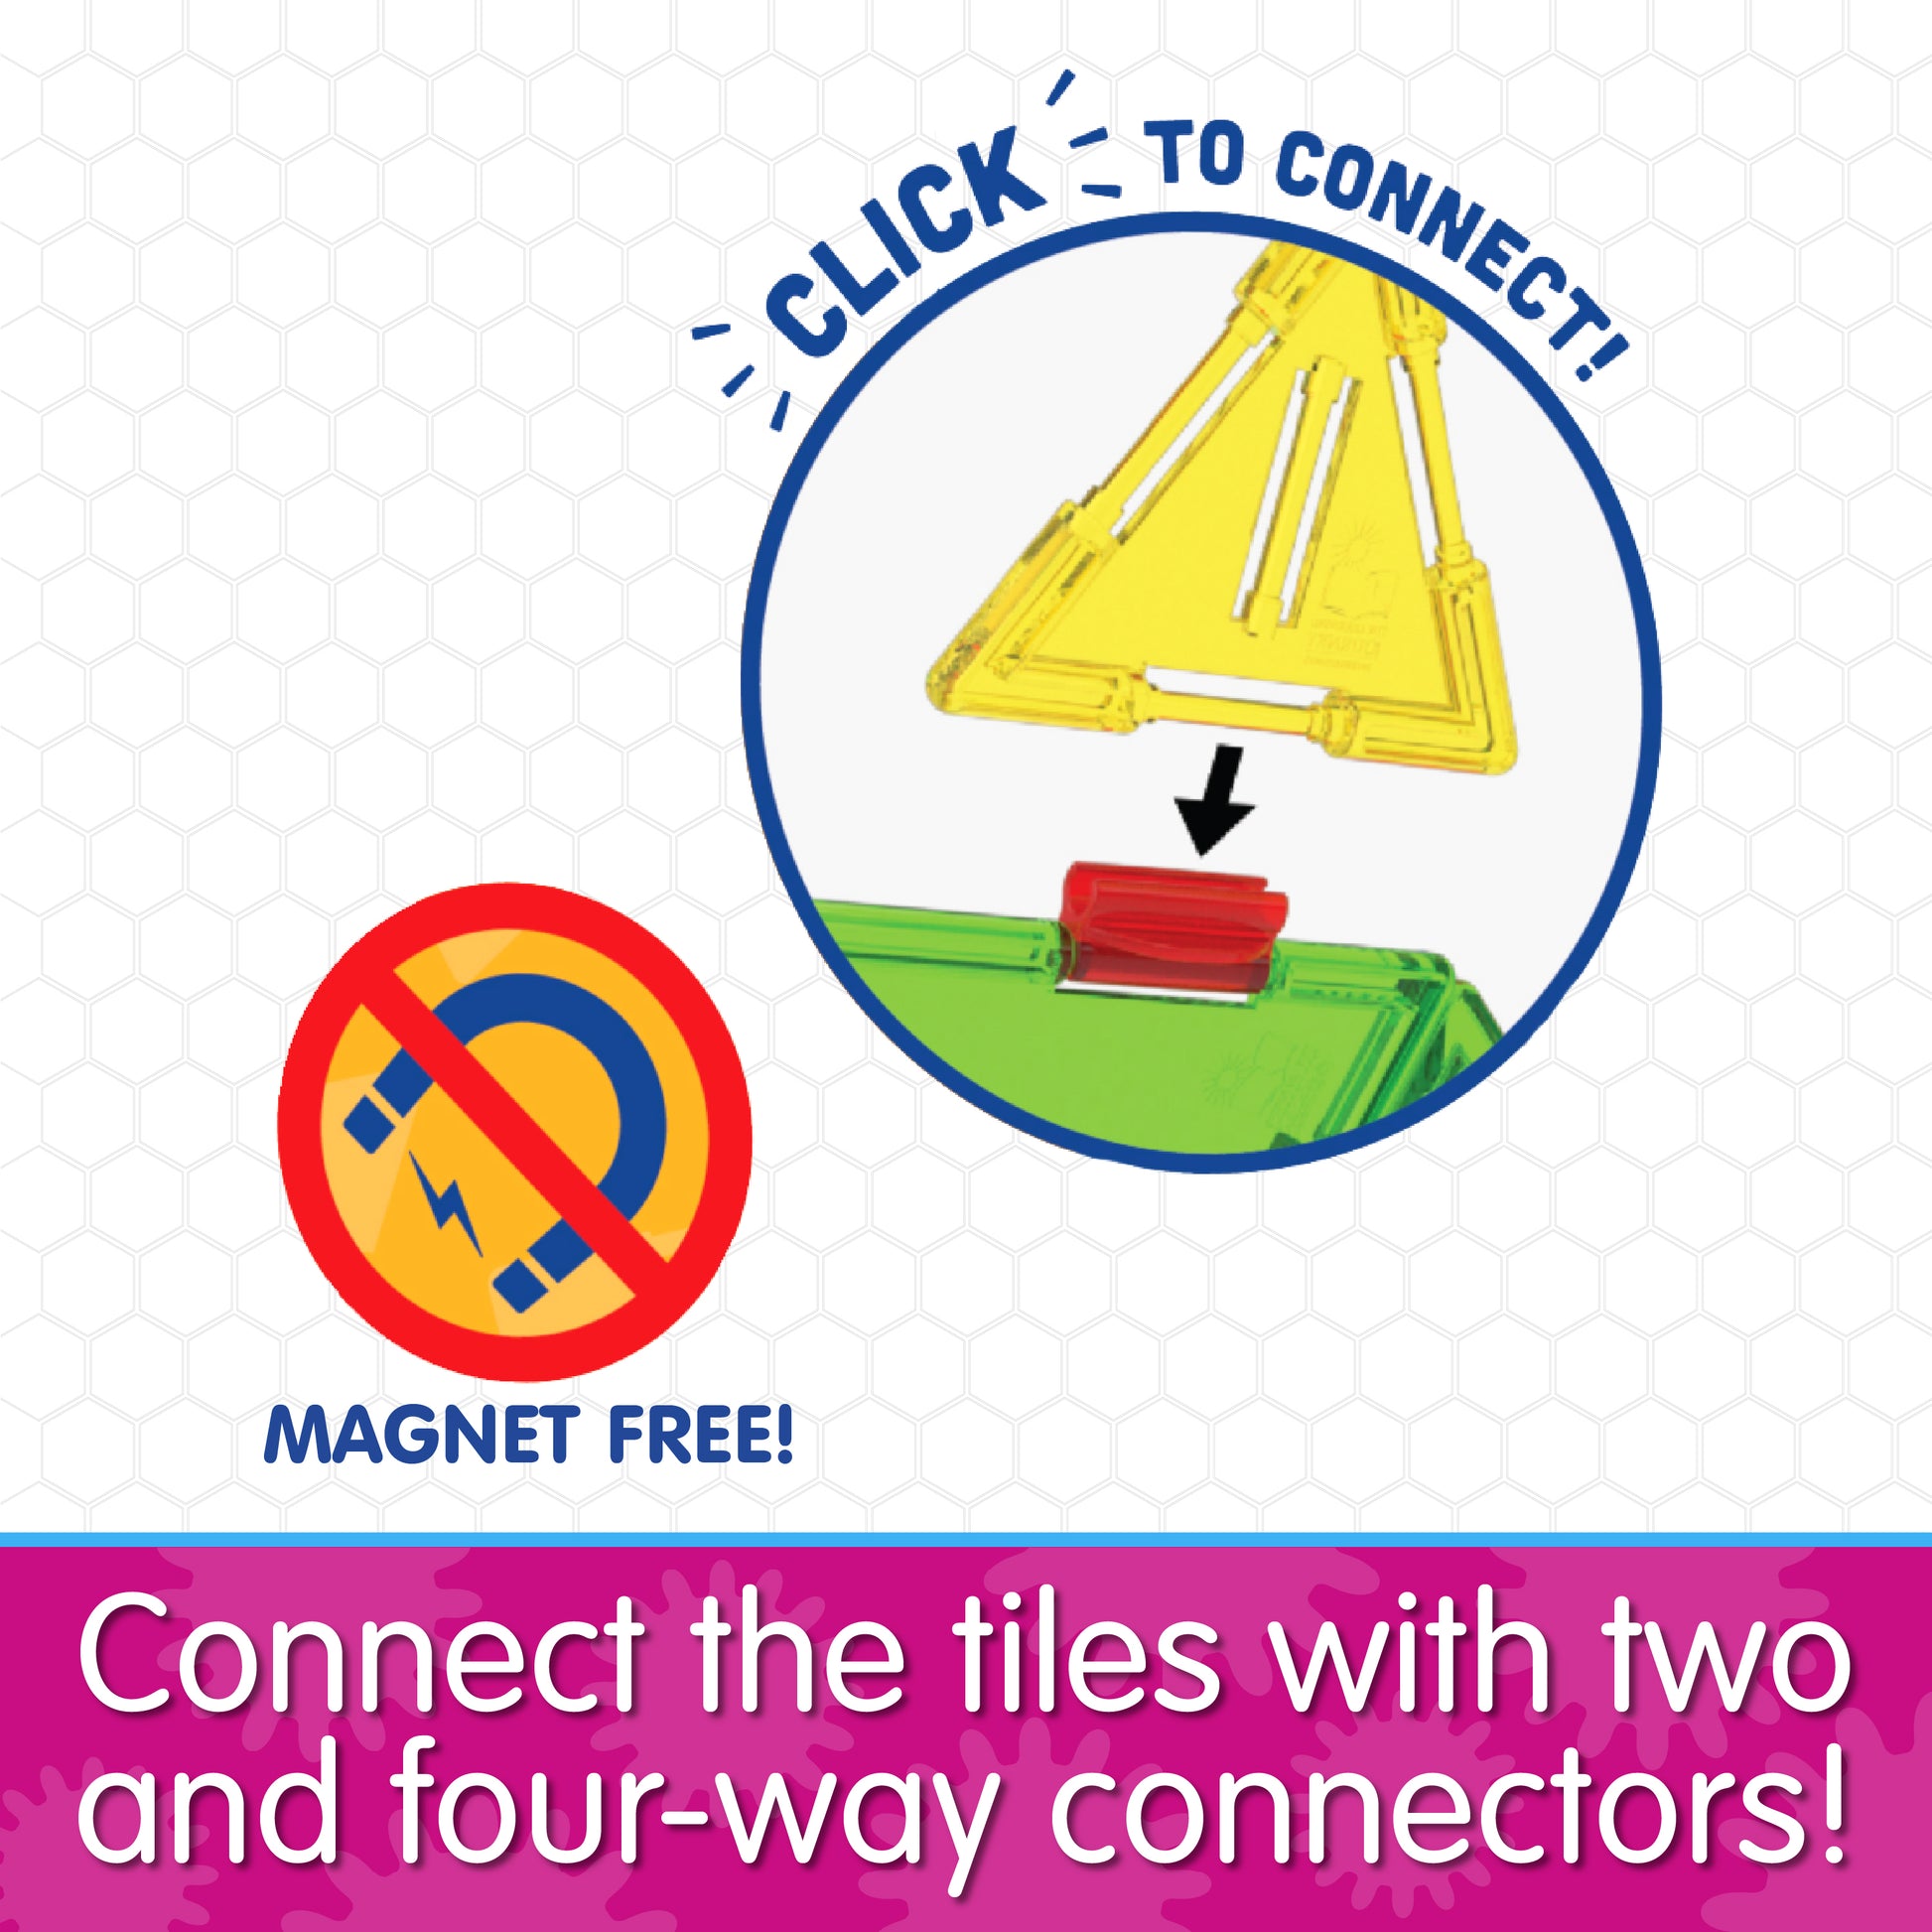 Infographic about Techno Tiles Super Set's features that says, "Connect the tiles with two and four-way connectors!"